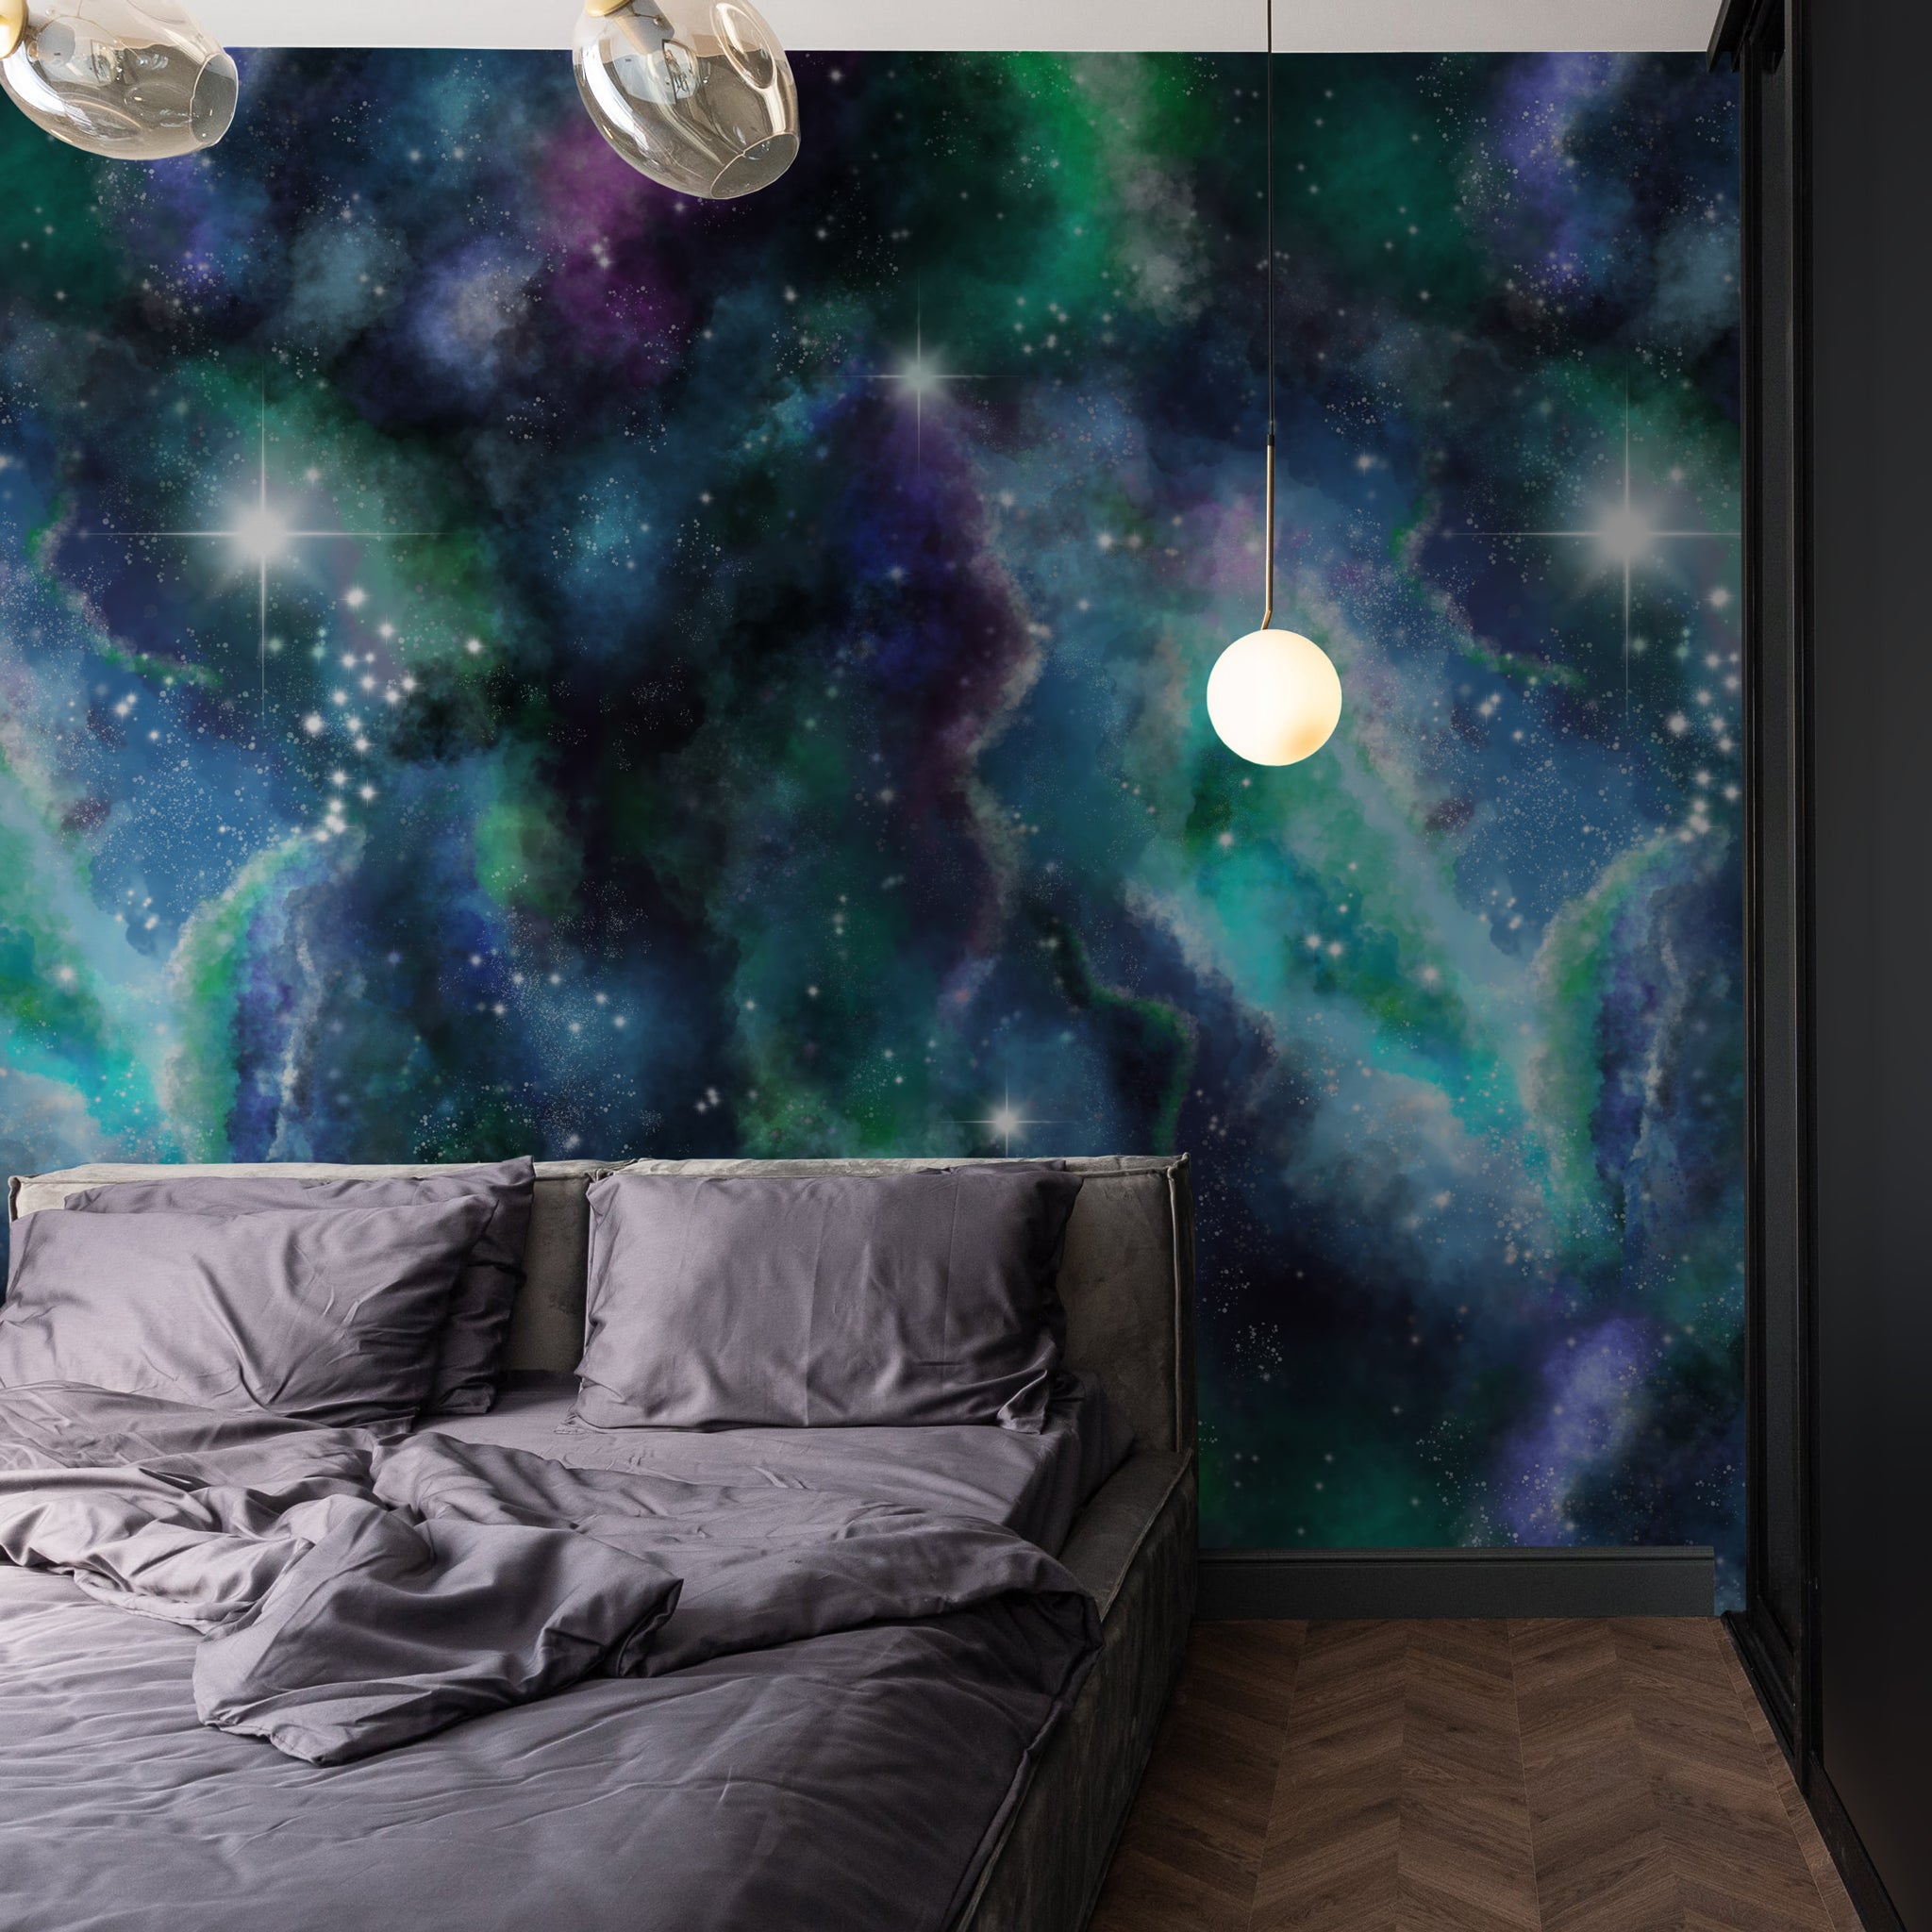 "Wall Blush Infinity Wallpaper enhancing a modern bedroom with cosmic design, adding depth and intrigue."